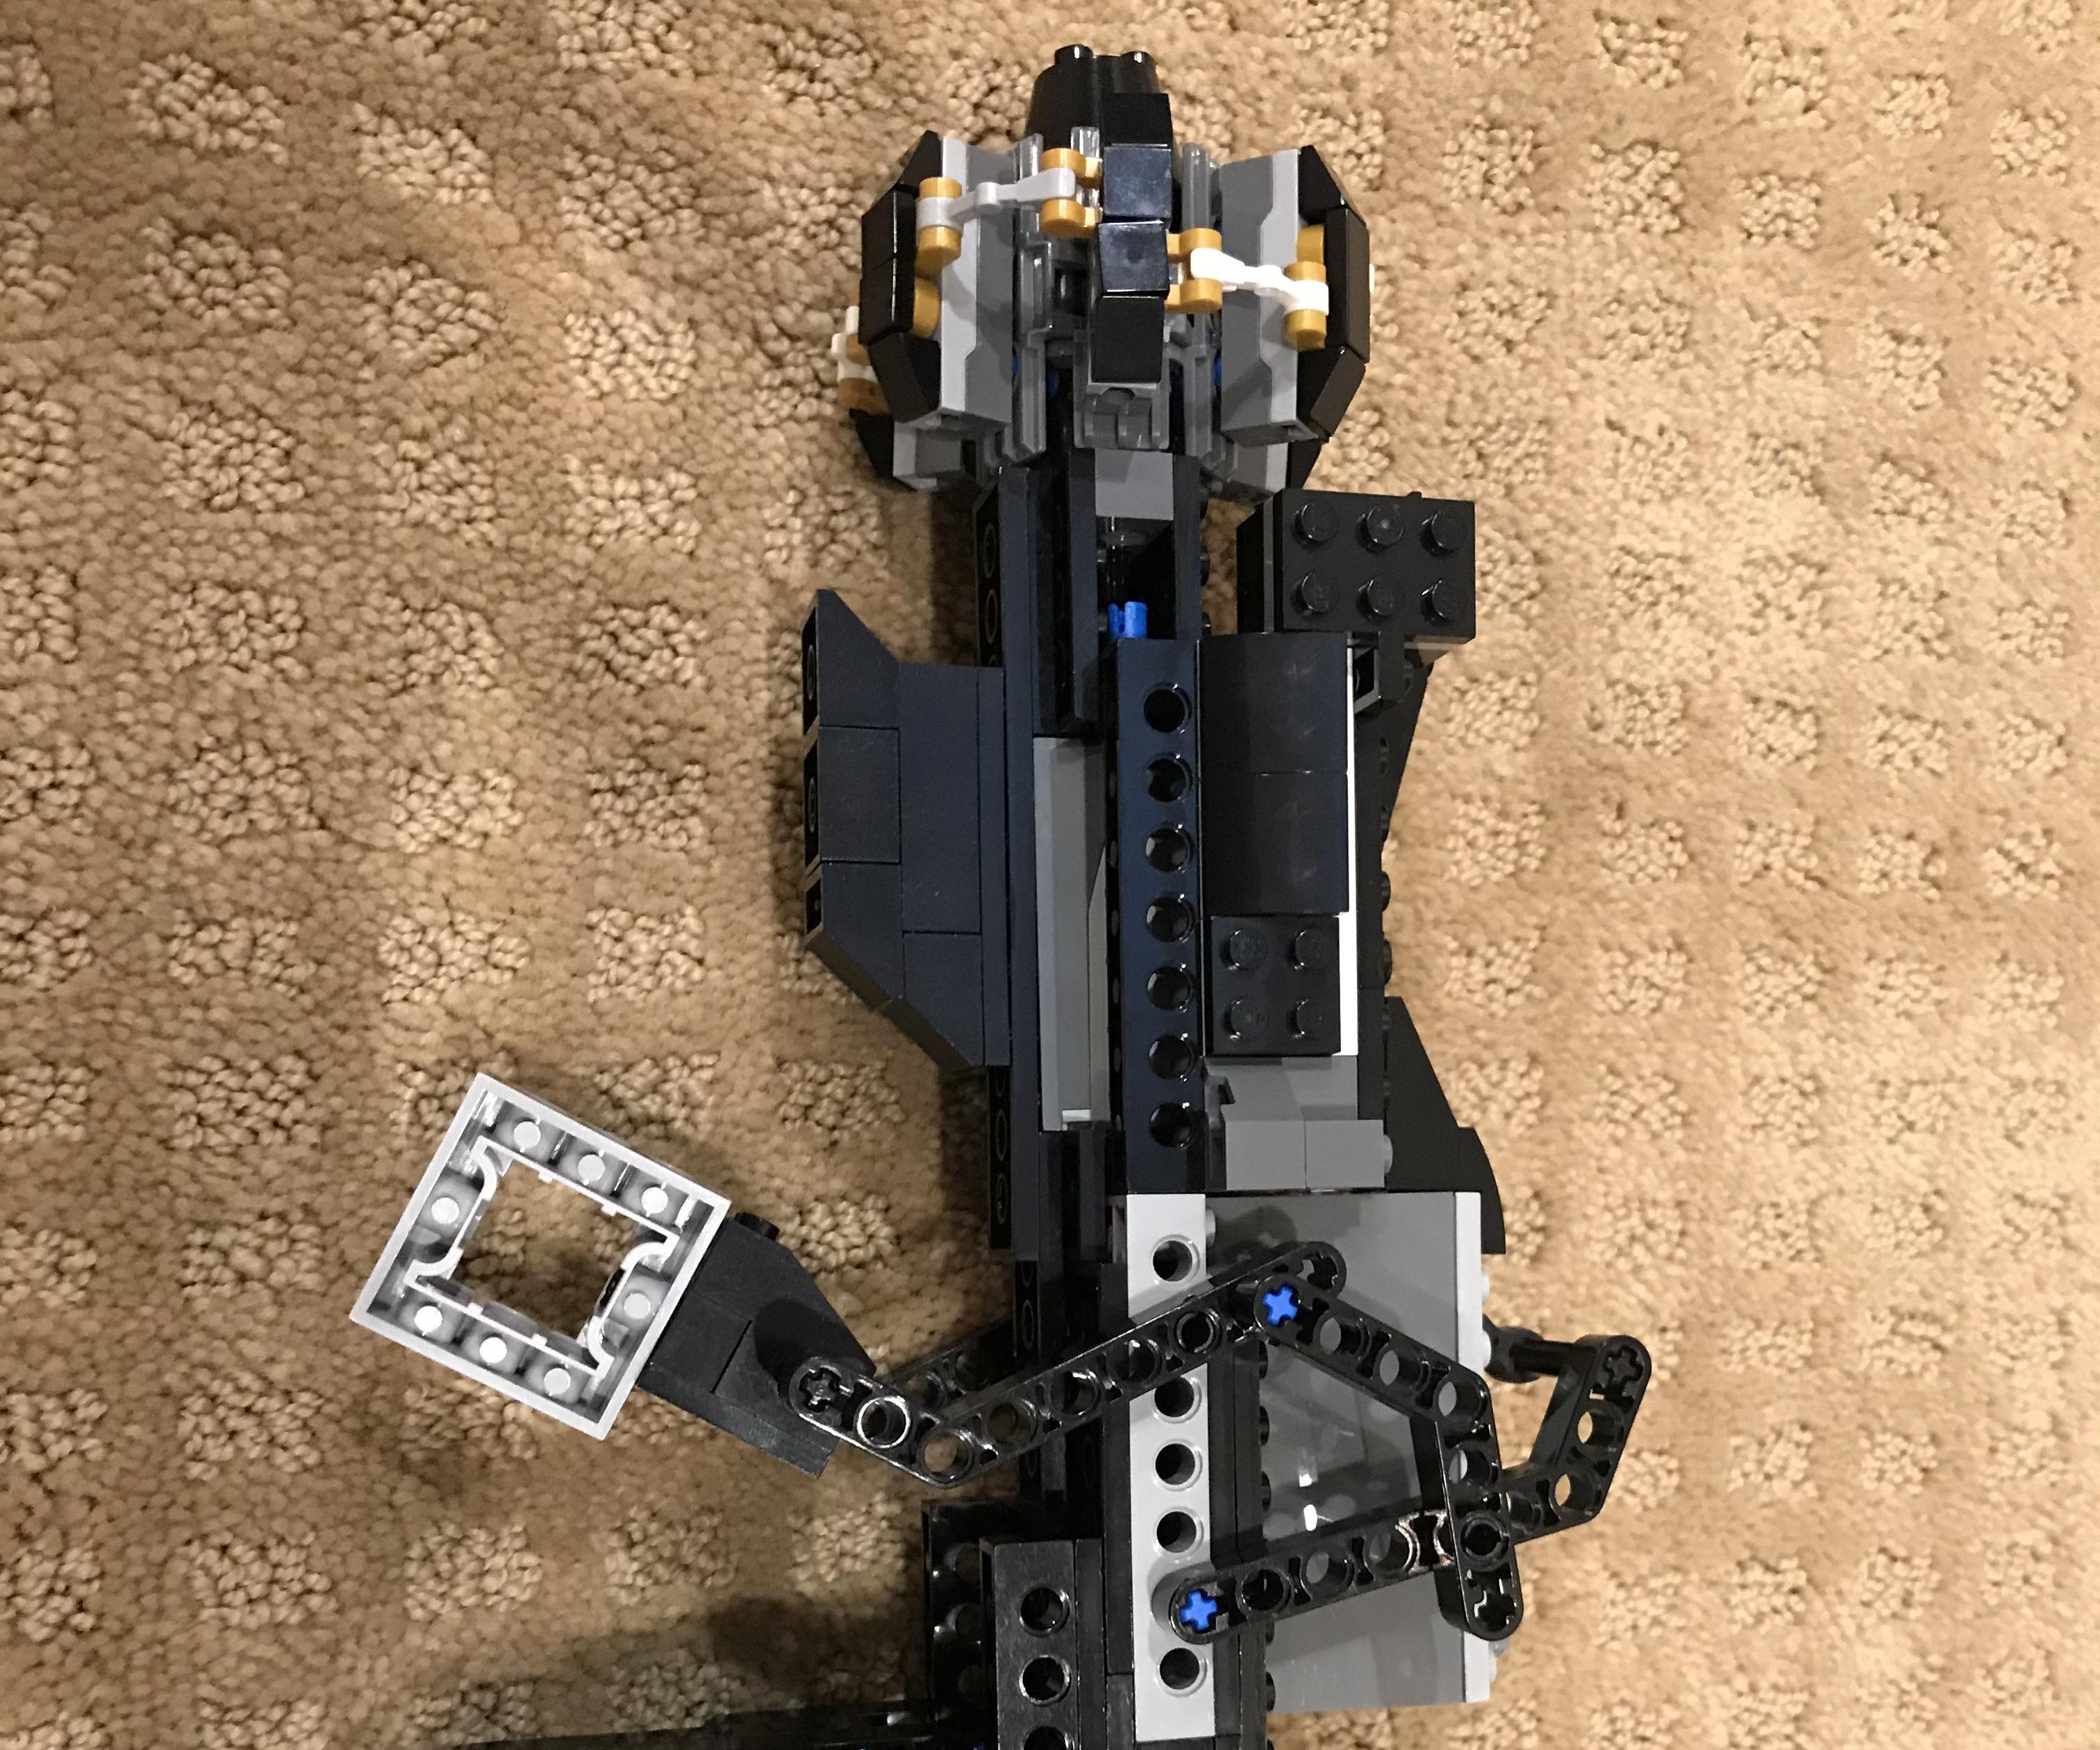 Lego Launcher Halloween Prop - Shoots at the Pull of a Trigger